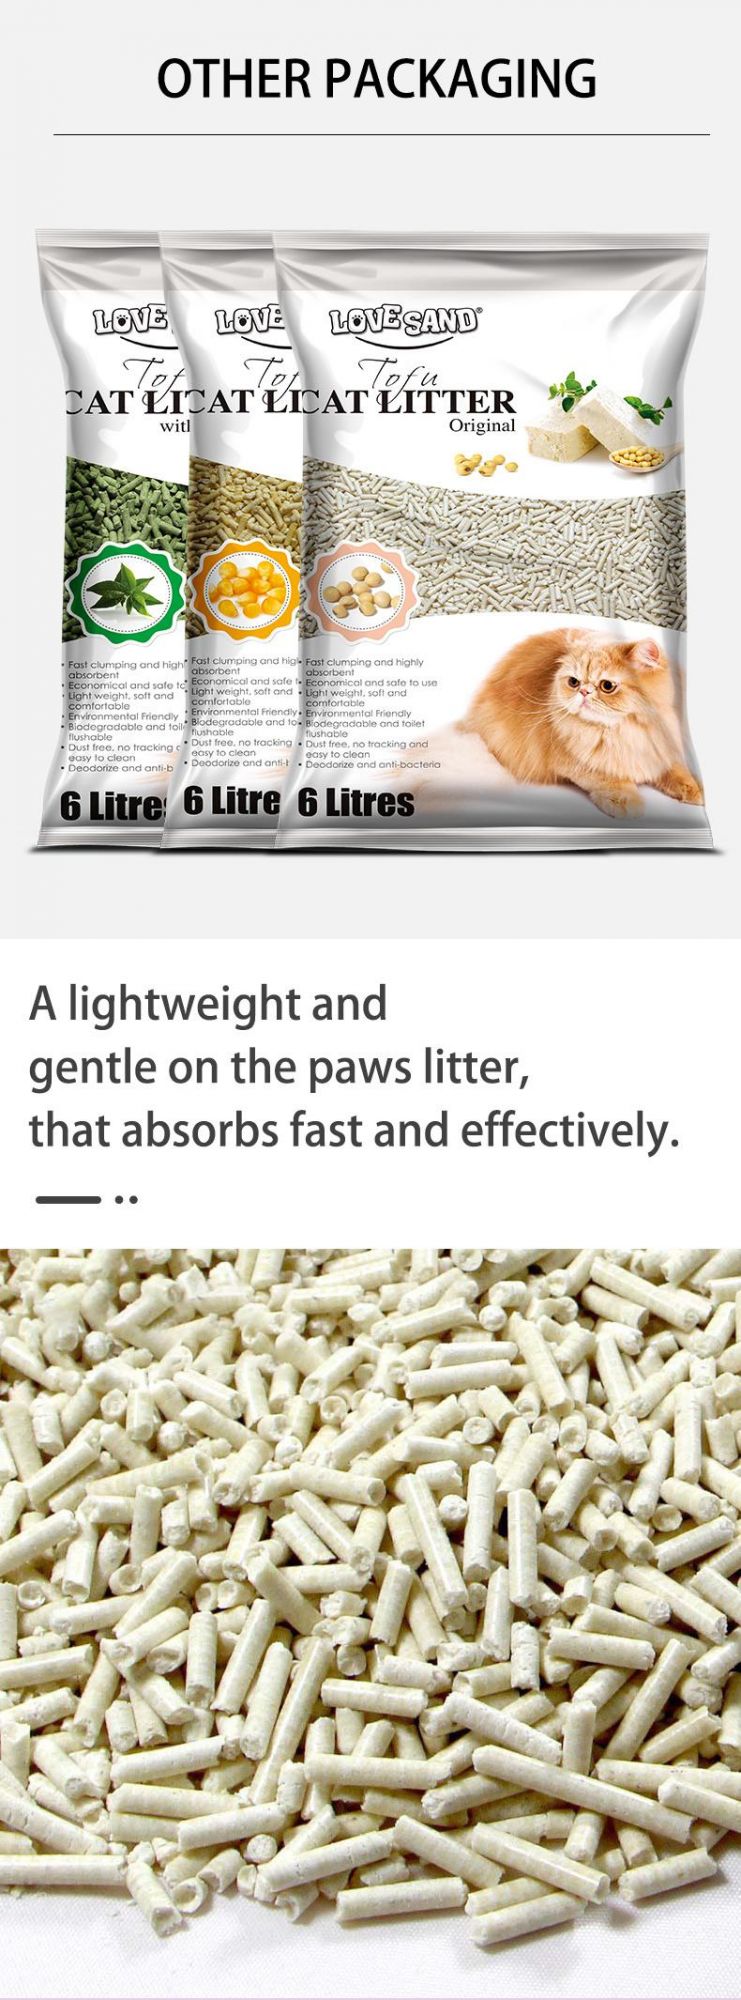 100% Biodegradable Environmental Tofu Kitty Cat Litter with Wholesale Prices